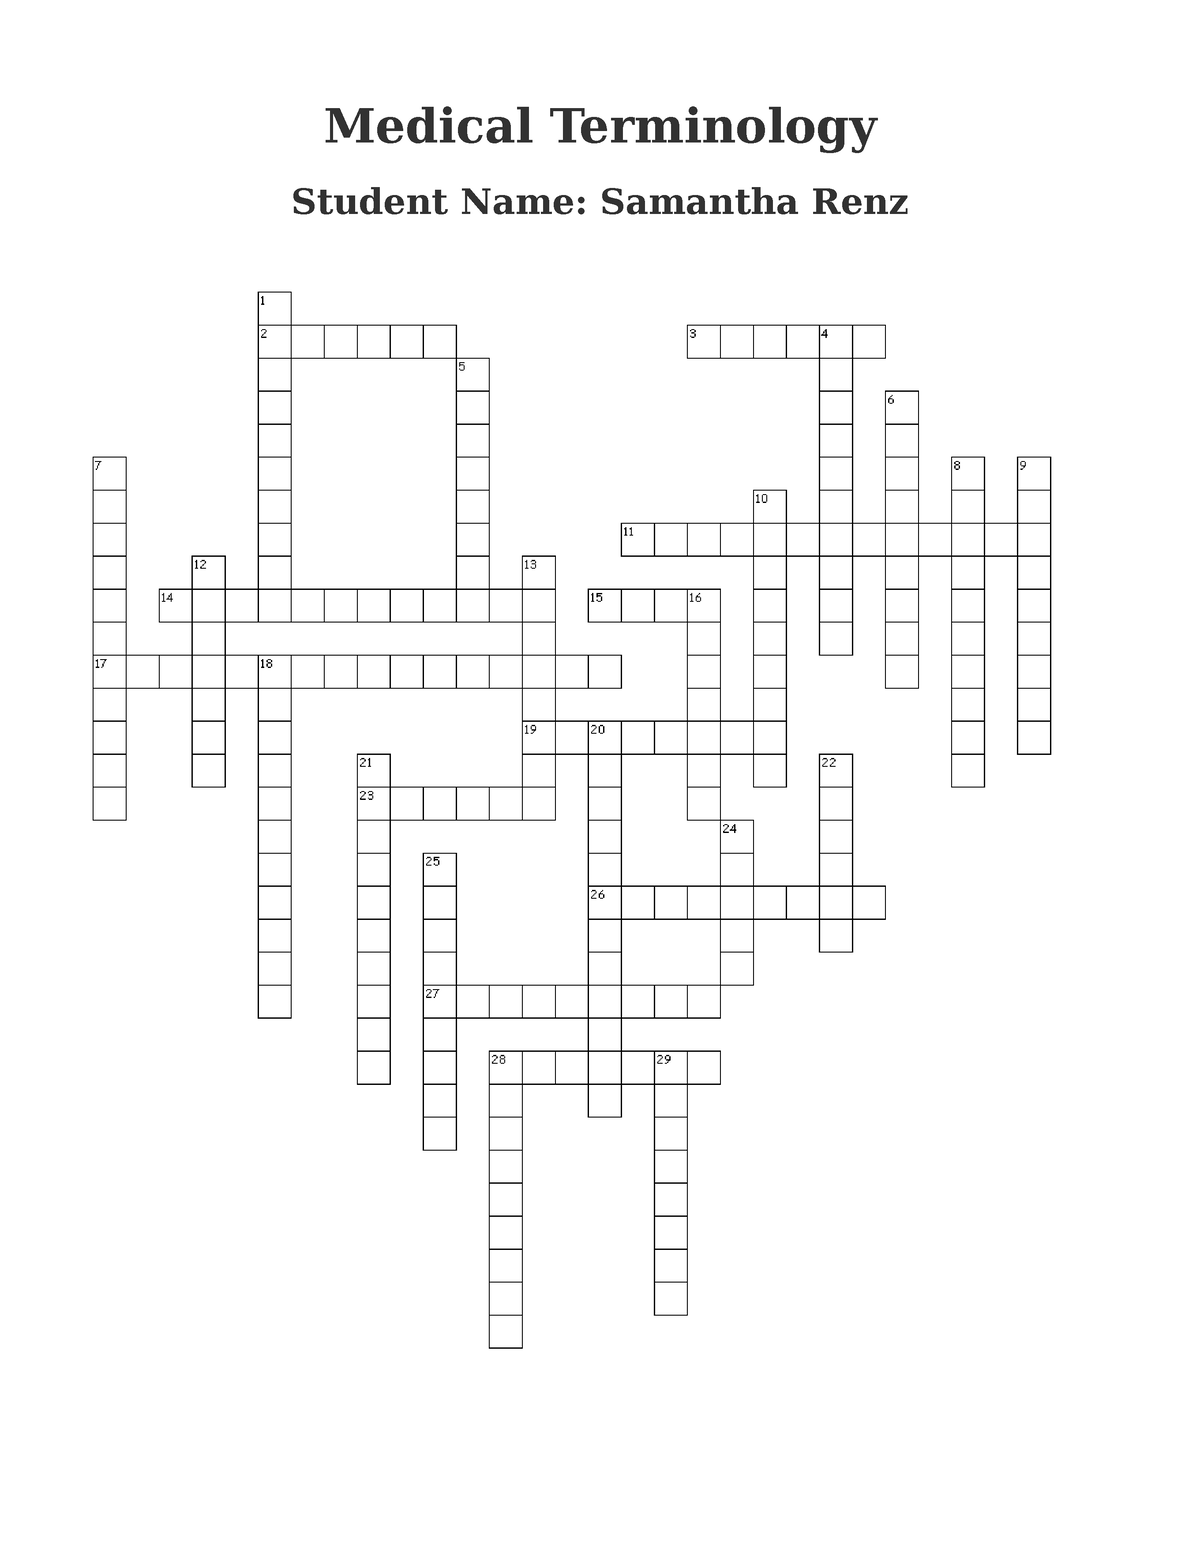 medical-terminology-crossword-puzzle-medical-terminology-student-name